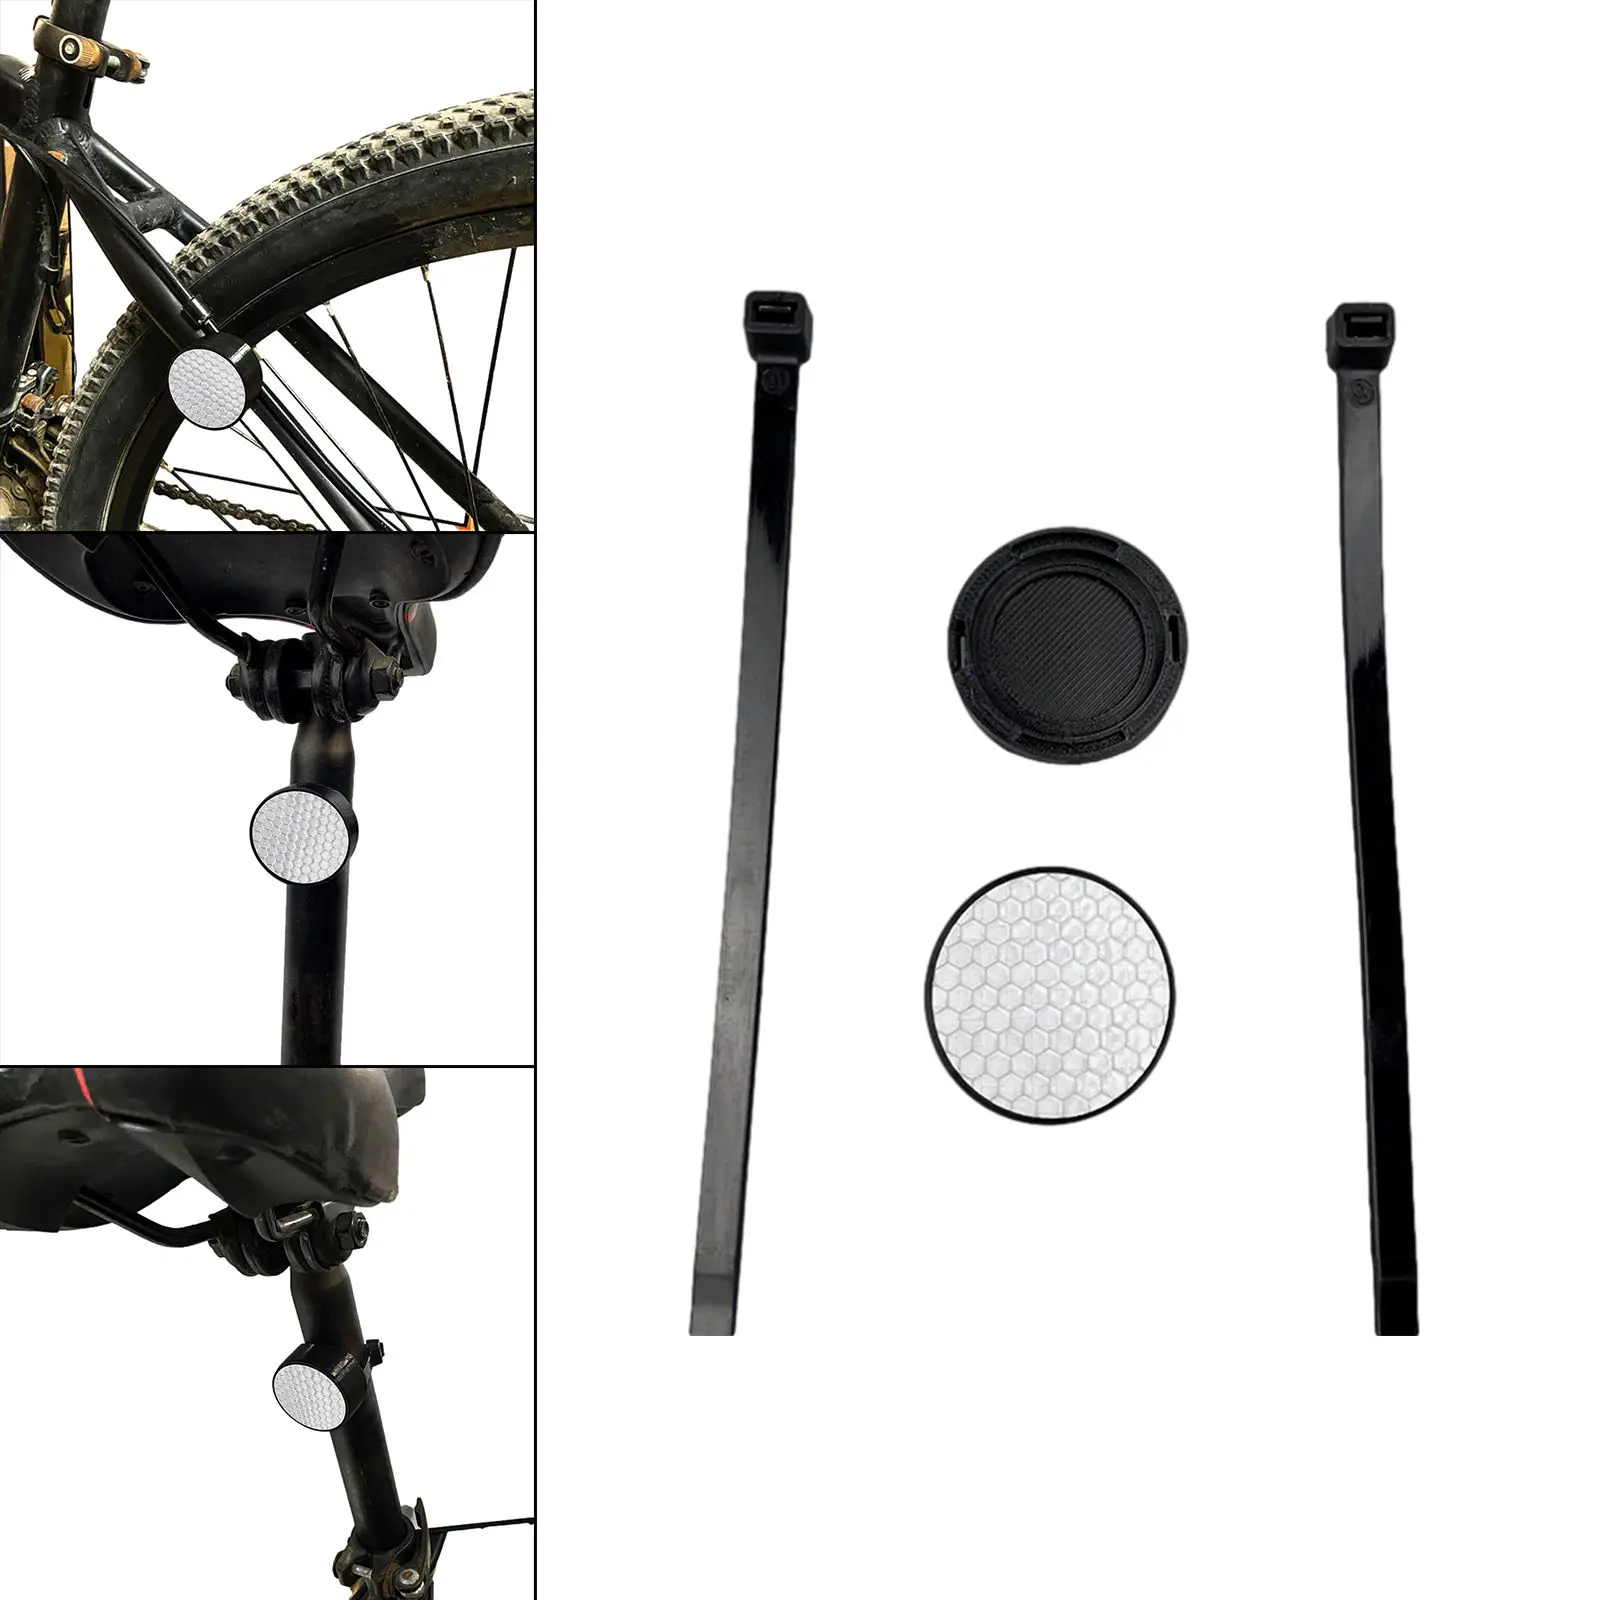 Bike Reflector Accessories Safety under Seat Tracking Locator Hidden Bracket for Holder Road Bicycle